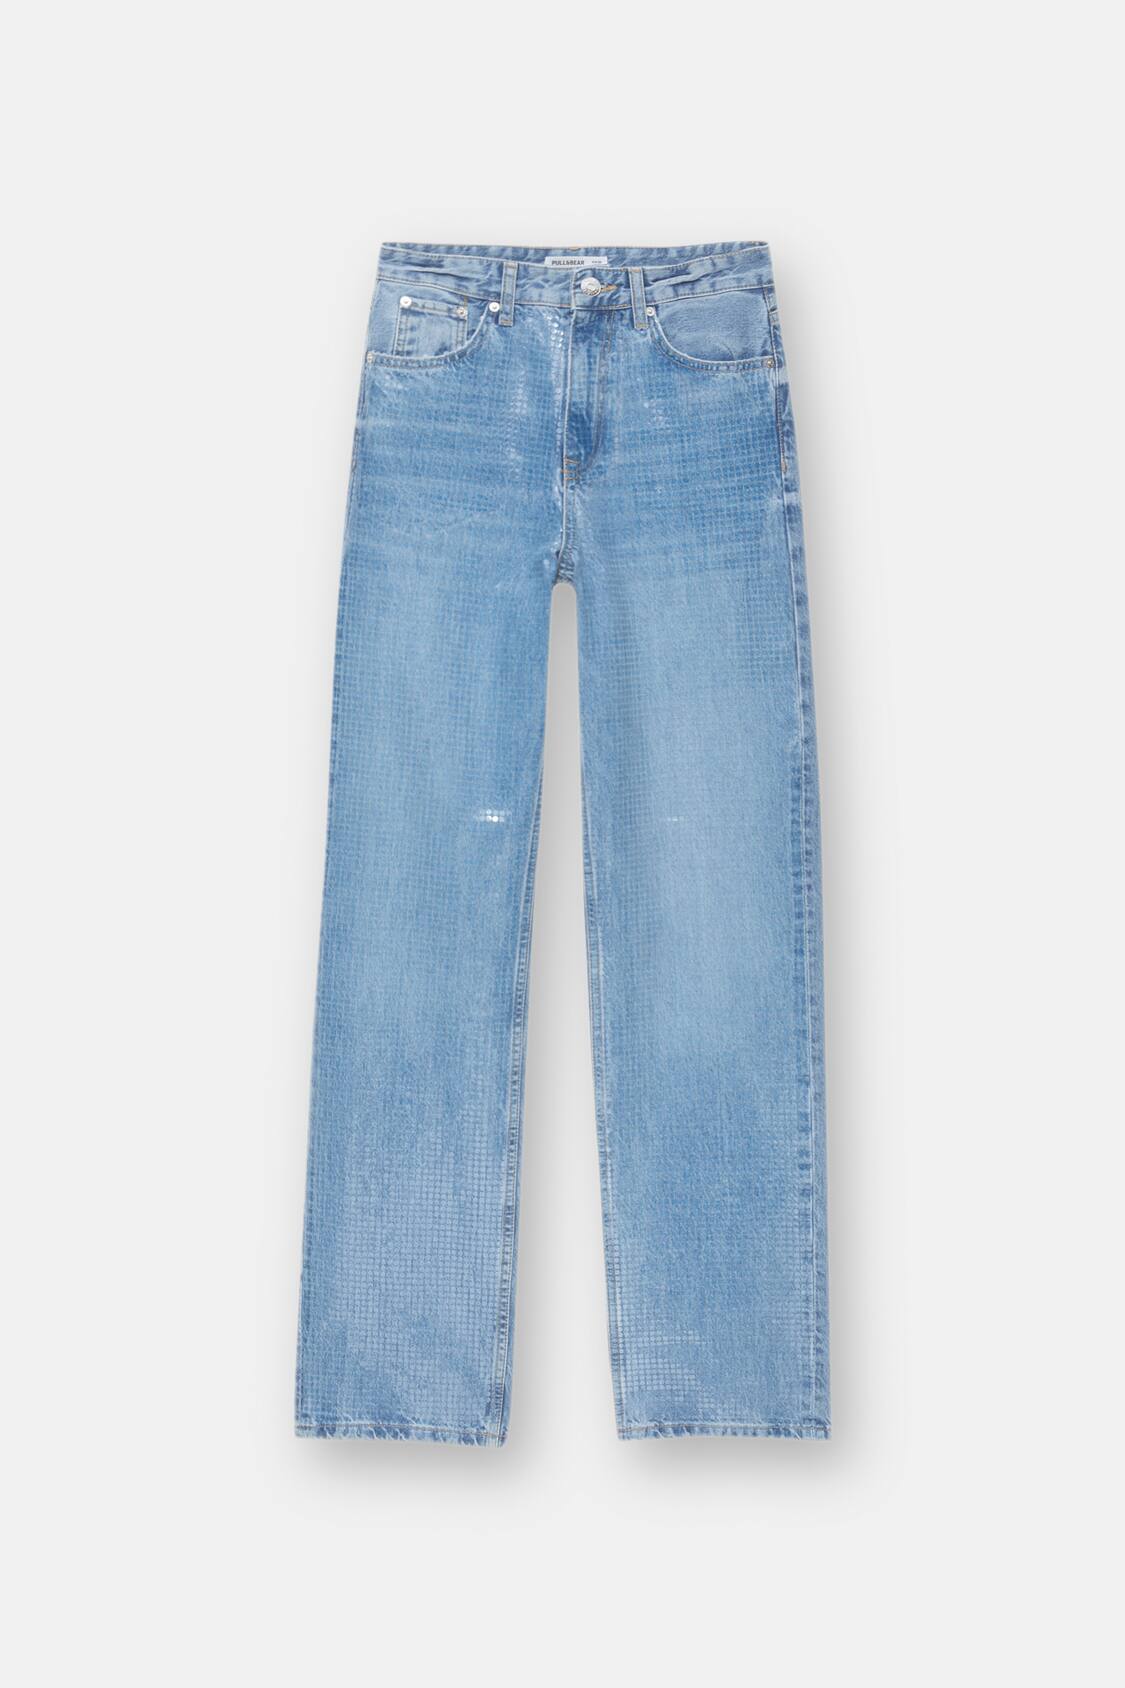 Pull&Bear Women's' Medium Blue Straight-Leg Mid-Rise Jeans with Sequins